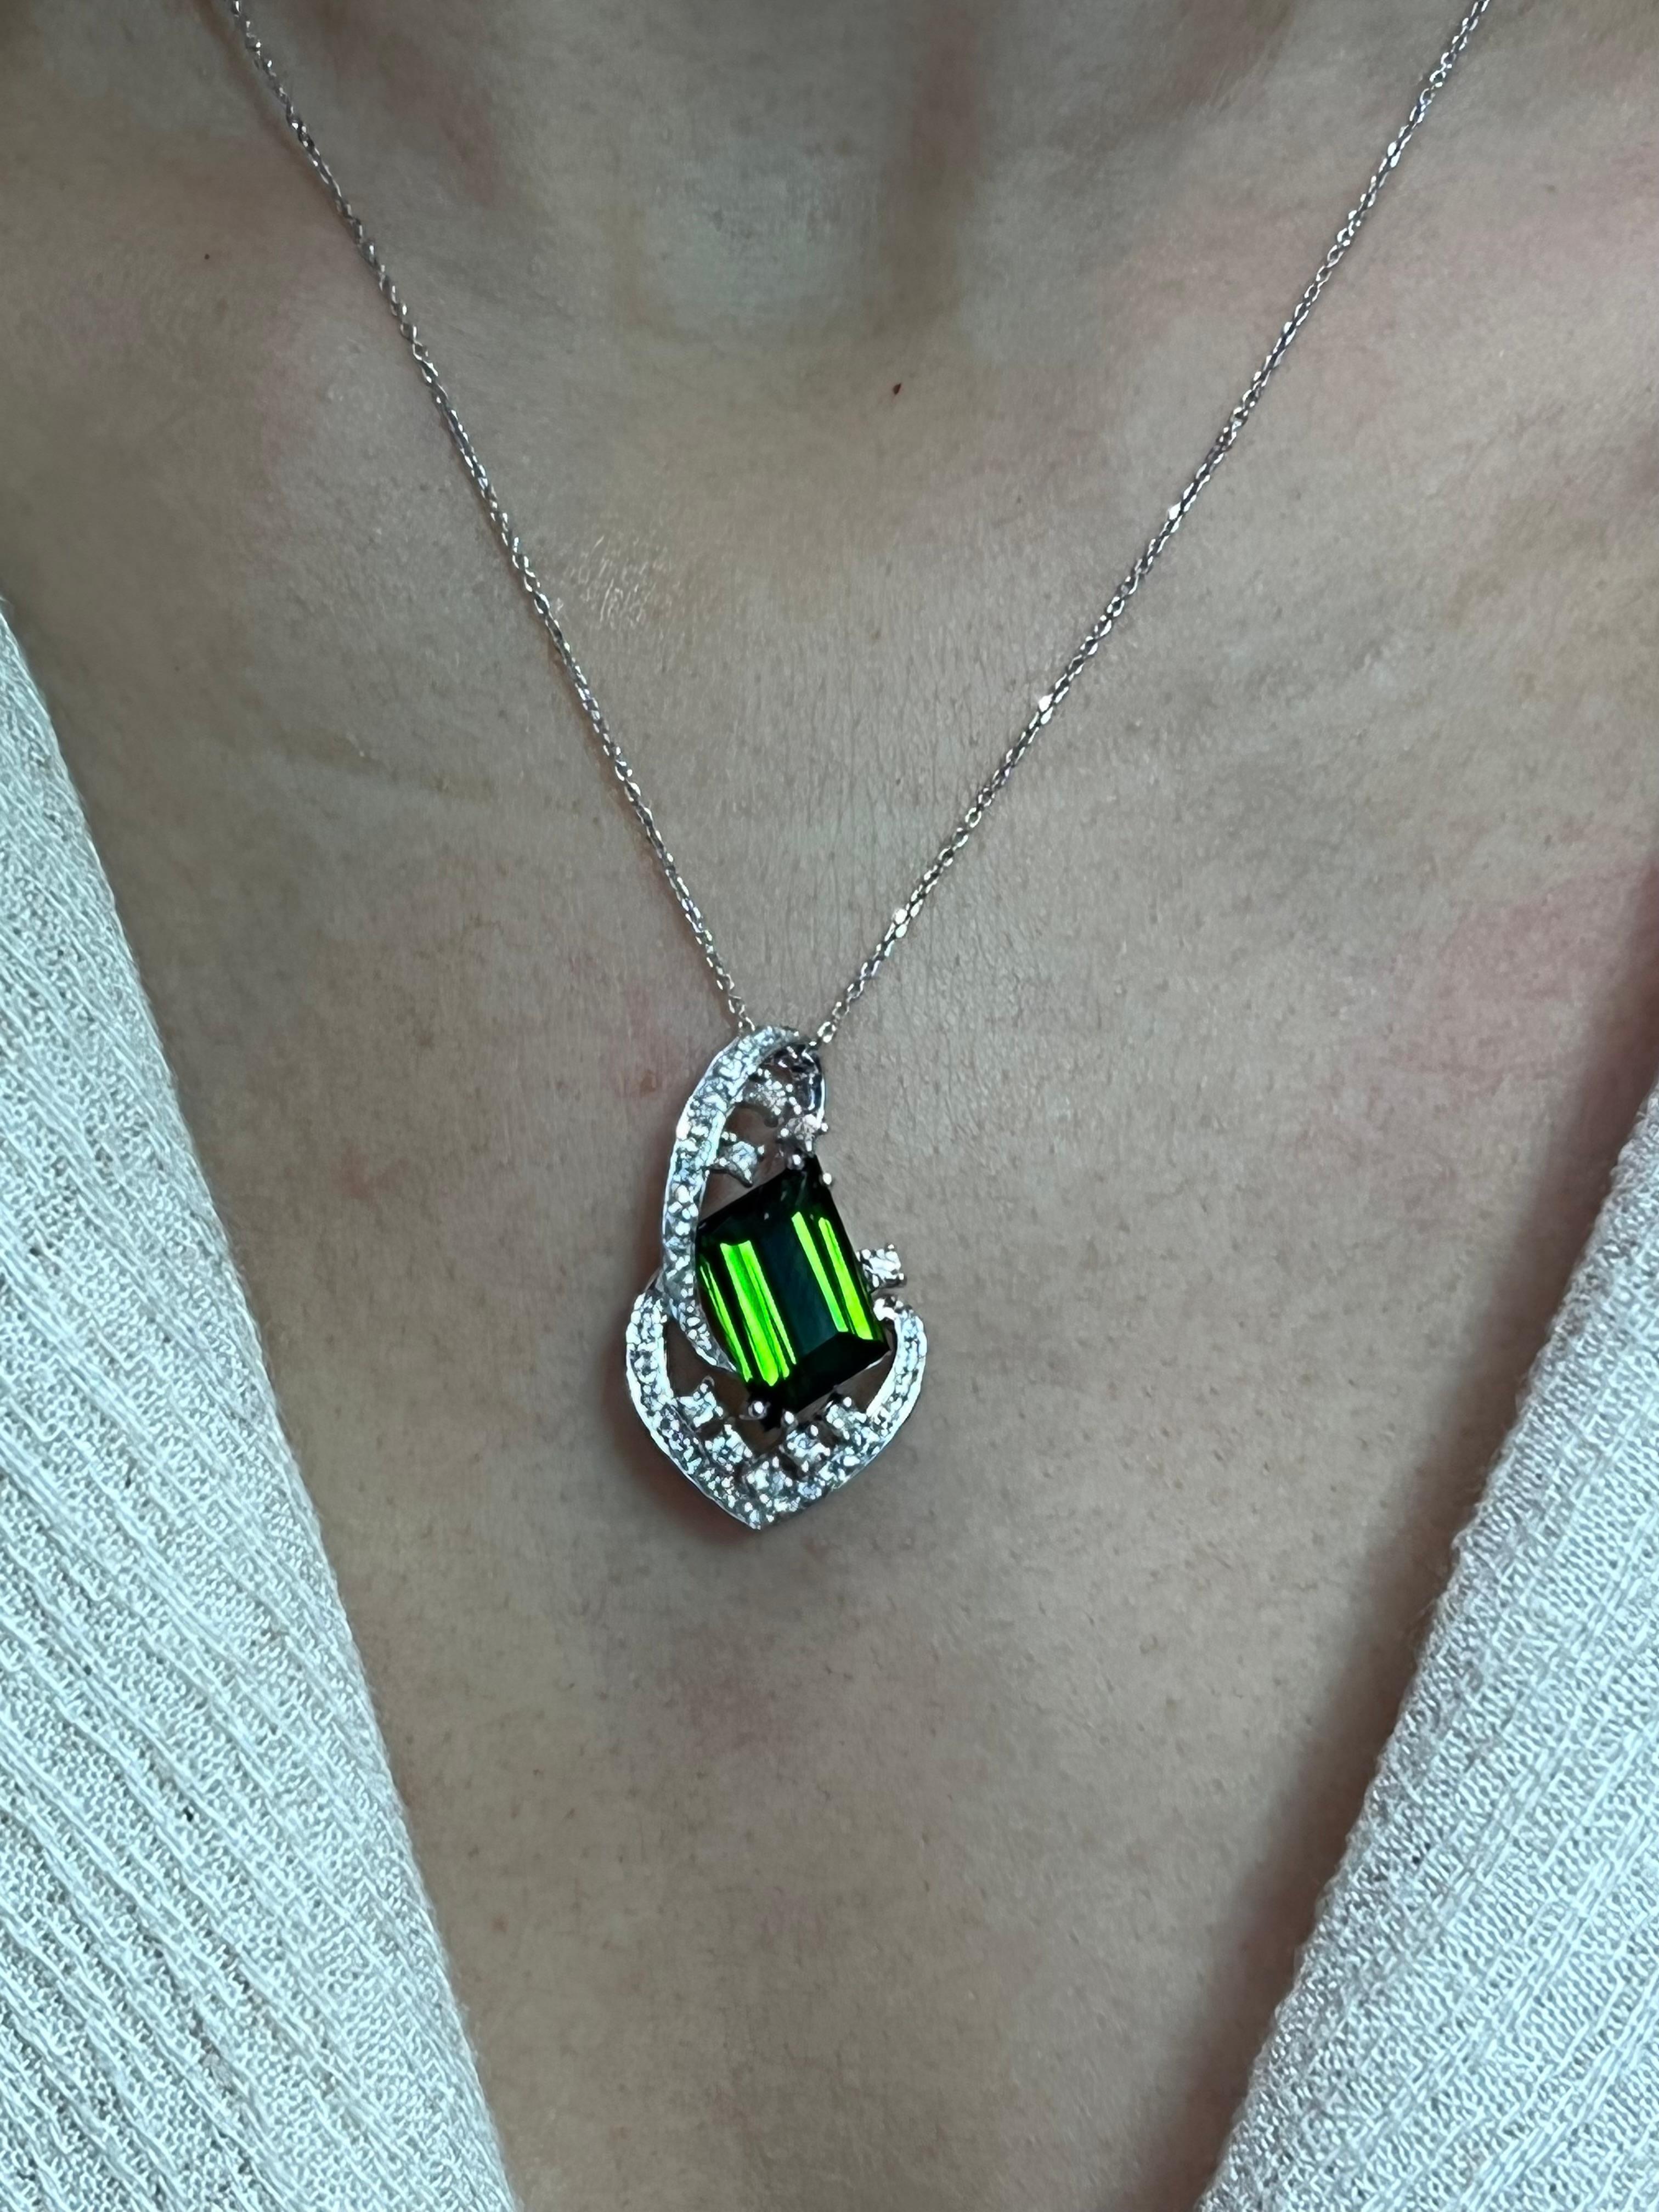 Please check out the HD video. This is a versatile piece of jewelry. You can wear this pendant dressed up or down. The green tourmaline pendant is made of 18k white gold and diamonds. There is one larger green tourmaline 5.43cts and 38 diamonds